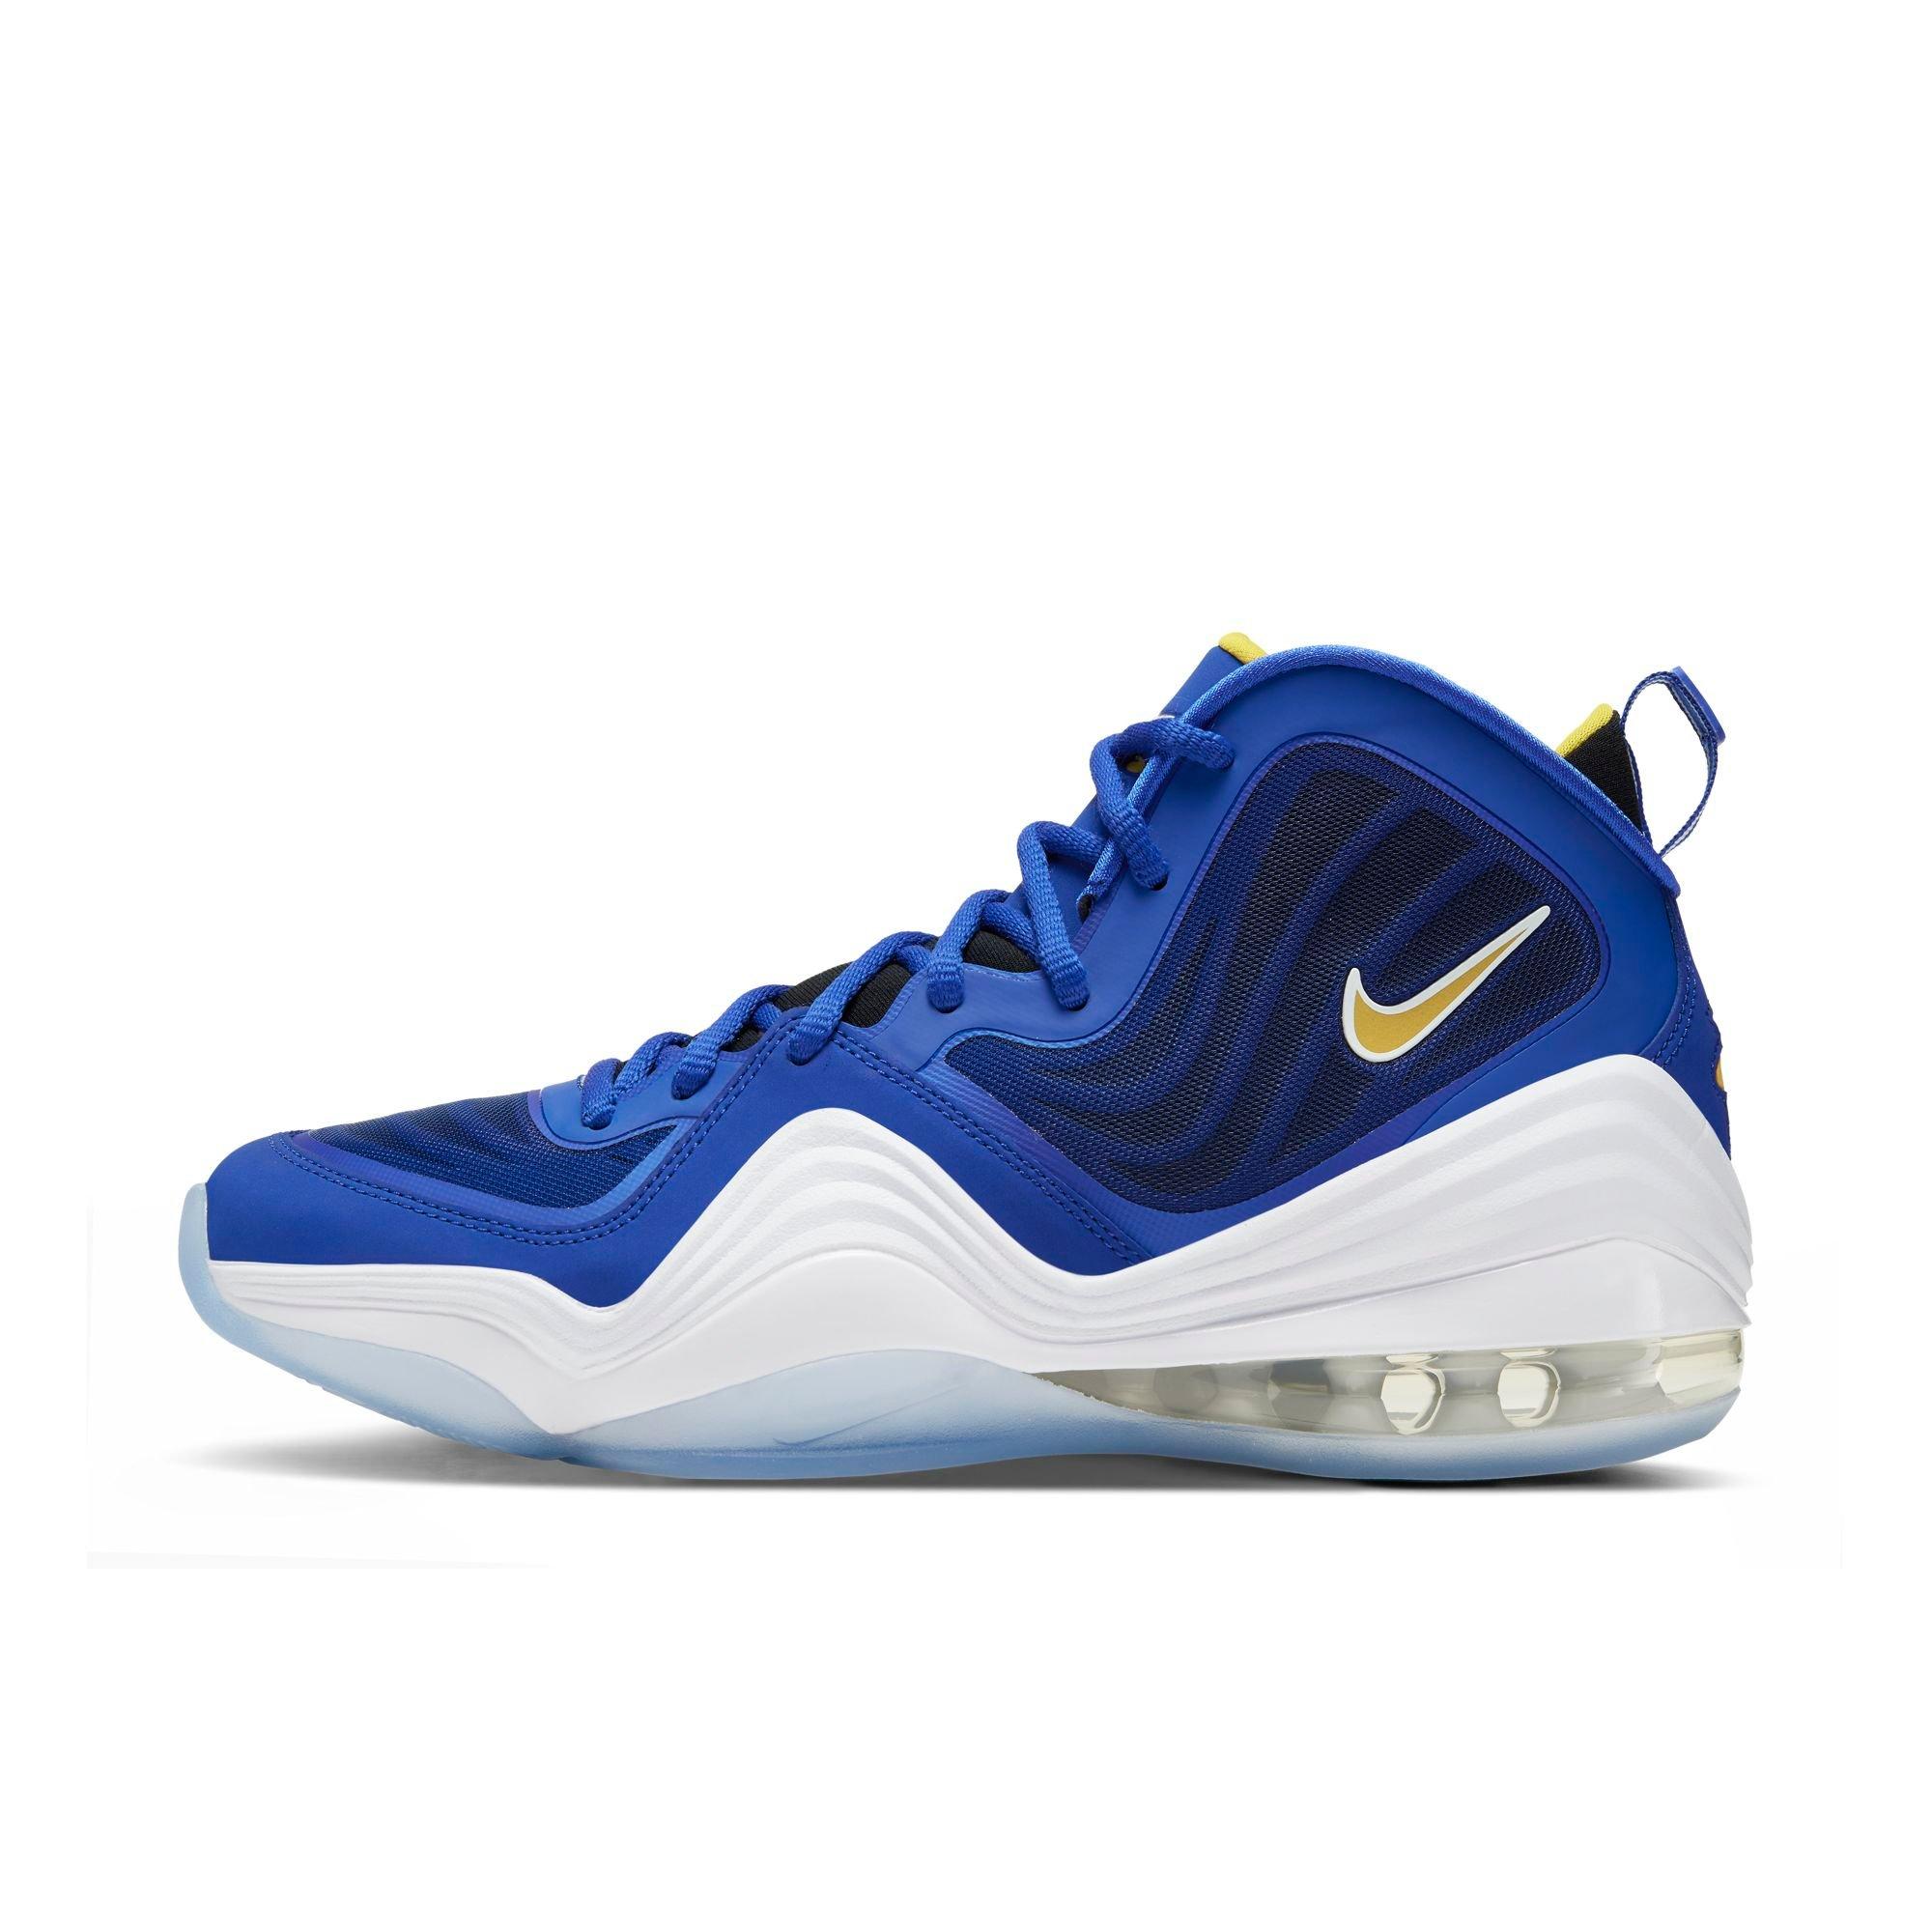 men's nike air penny 5 basketball shoes